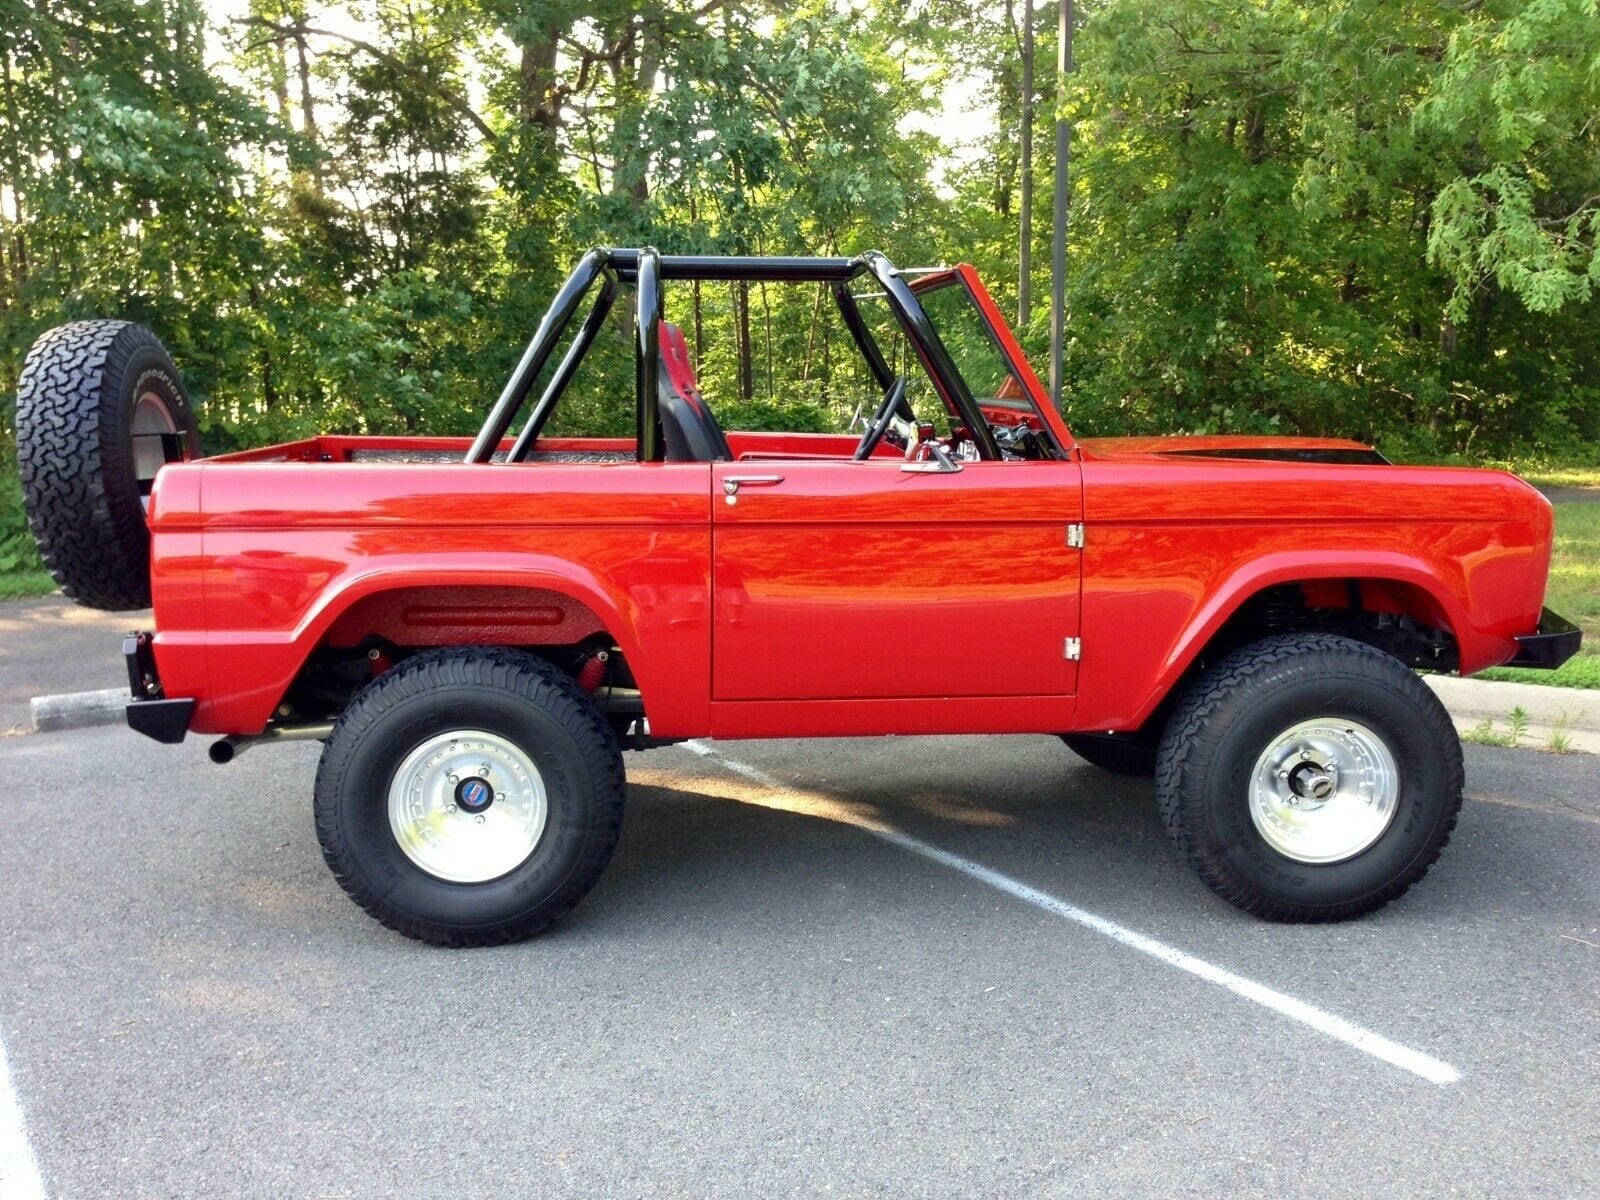 Red 1967 Bronco Restomod sitting in a parking lot